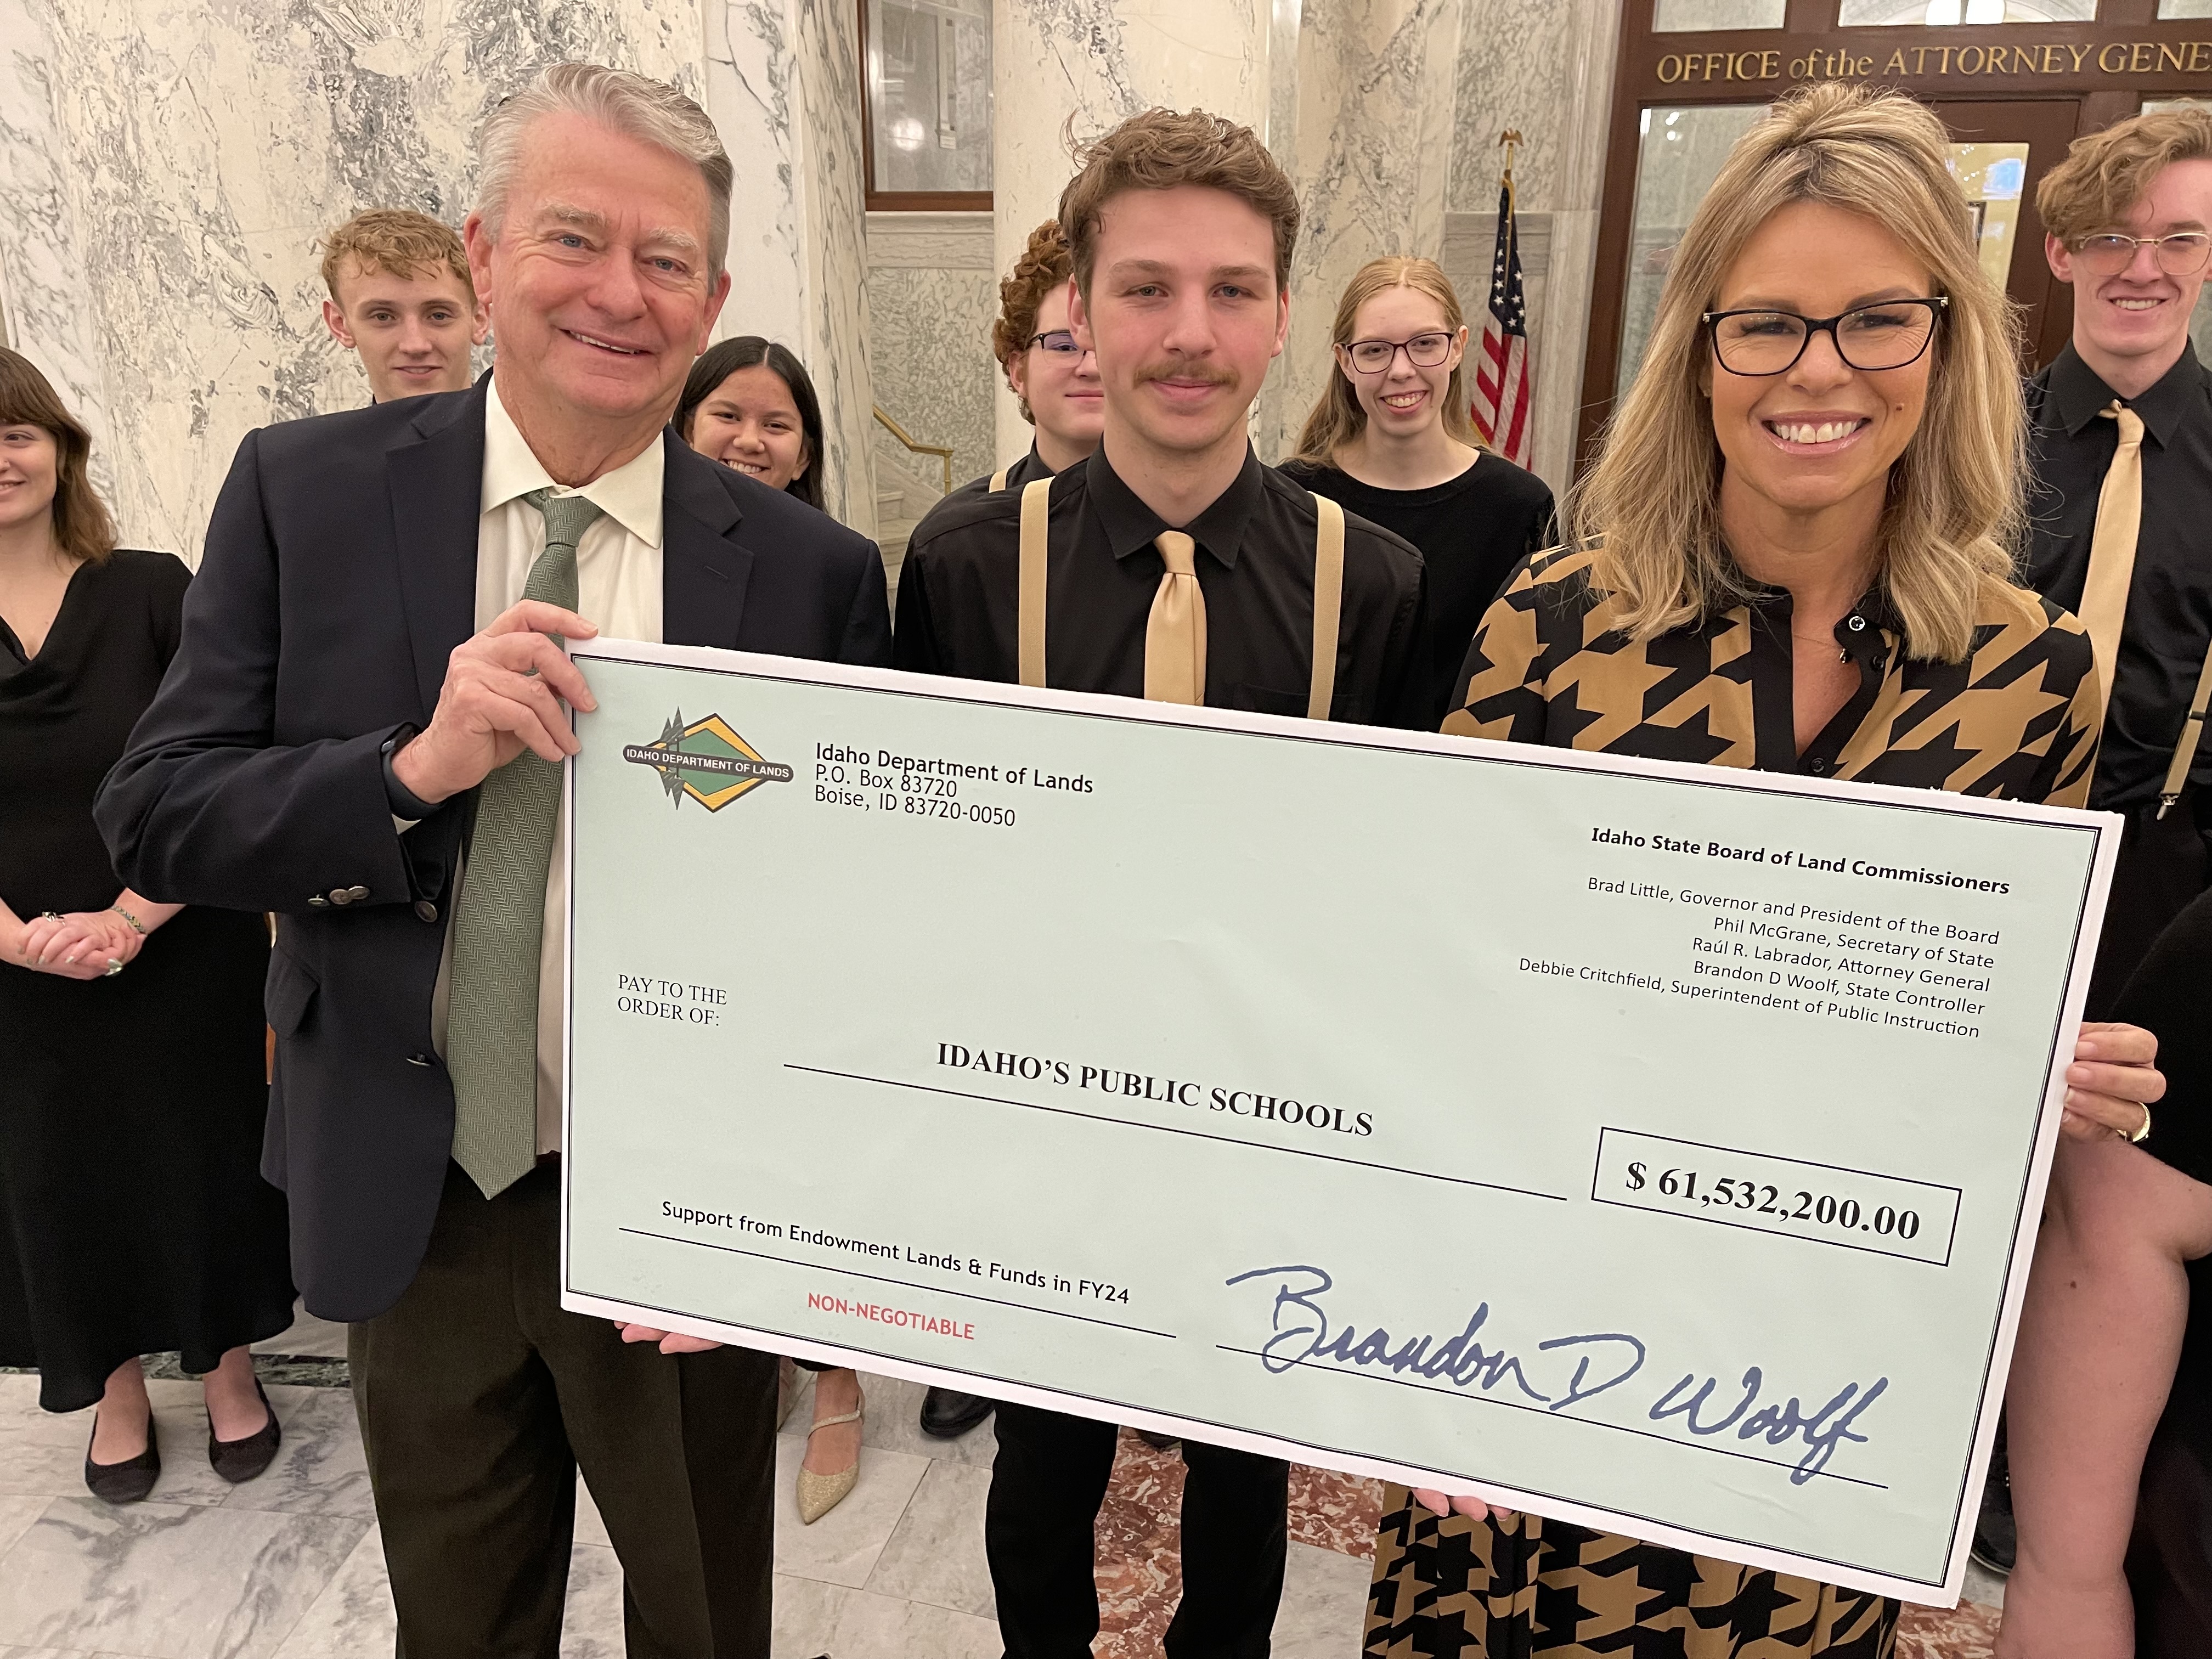 A ceremonial check held by Idaho's Governor and Secretary of Public Instruction with a choir student between them.